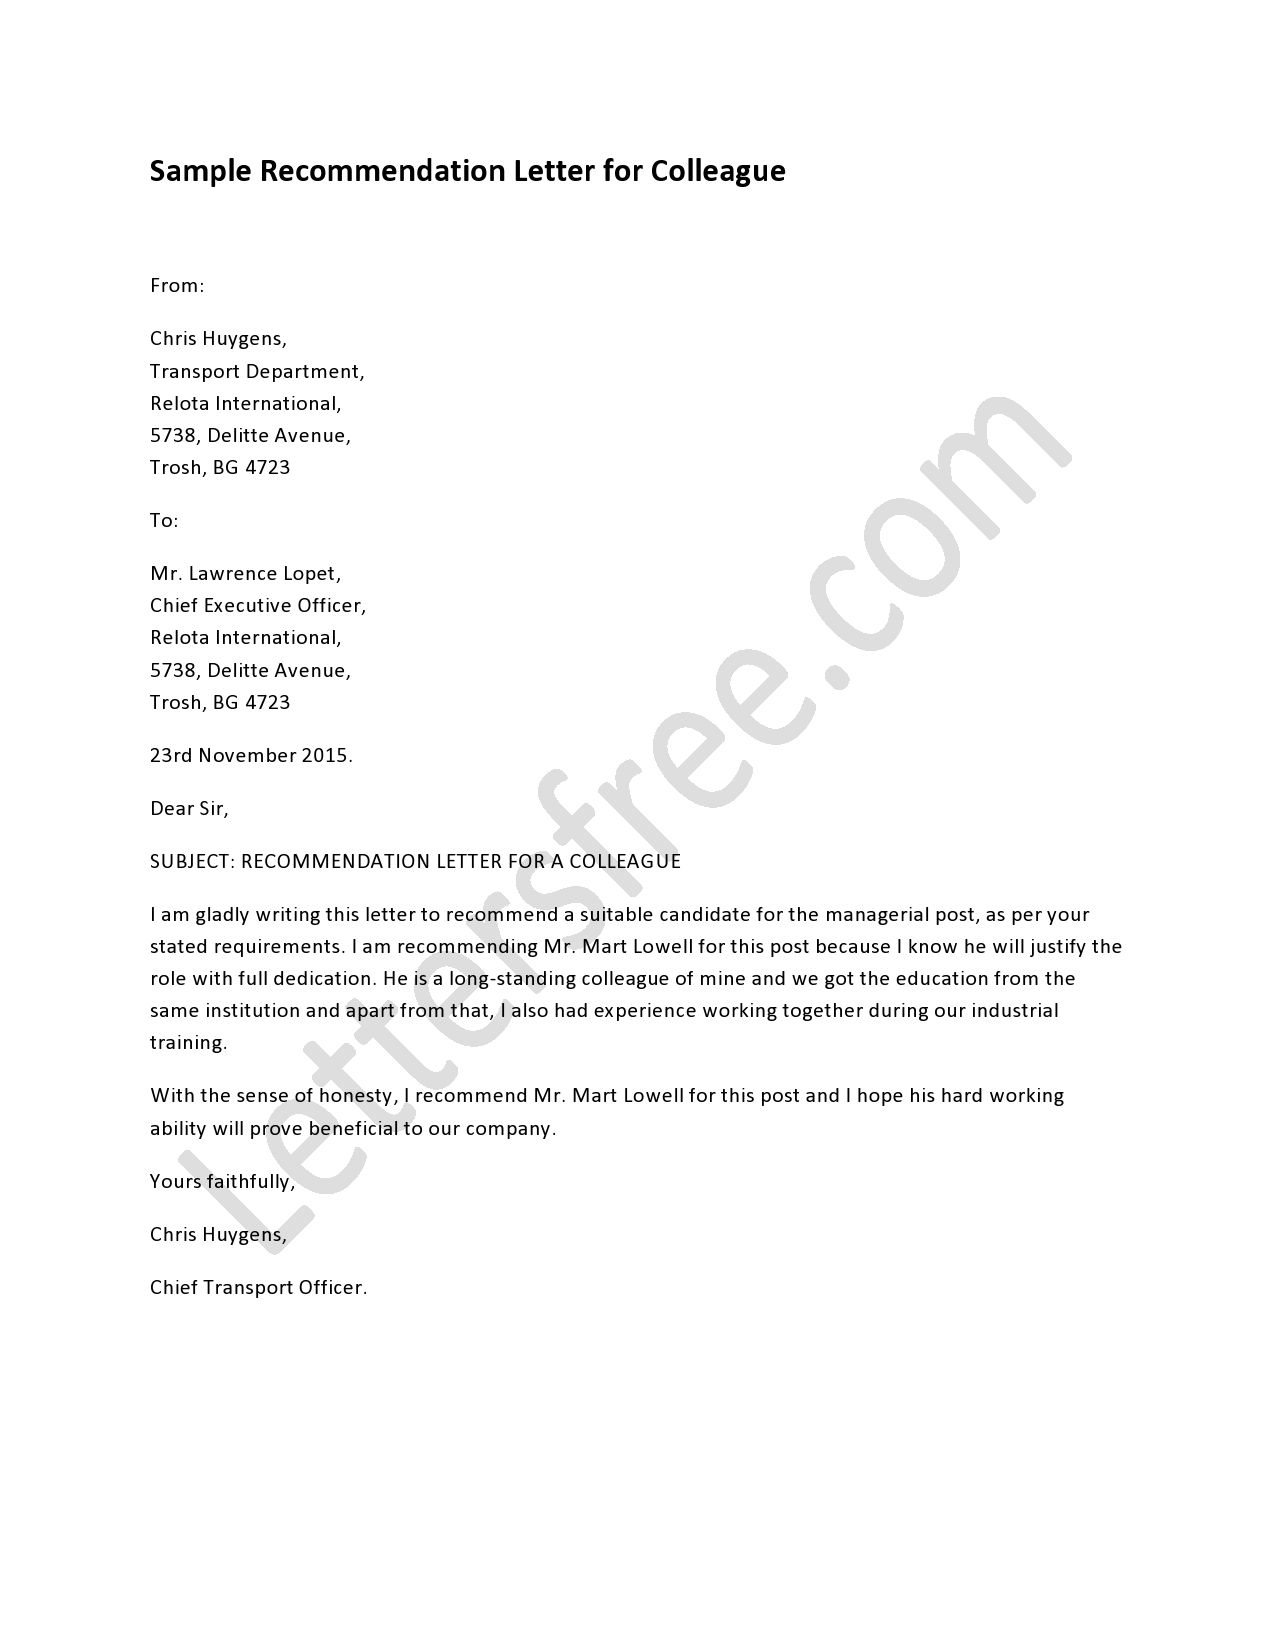 Recommendation Letter For Colleague Lettering Writing A within proportions 1275 X 1650